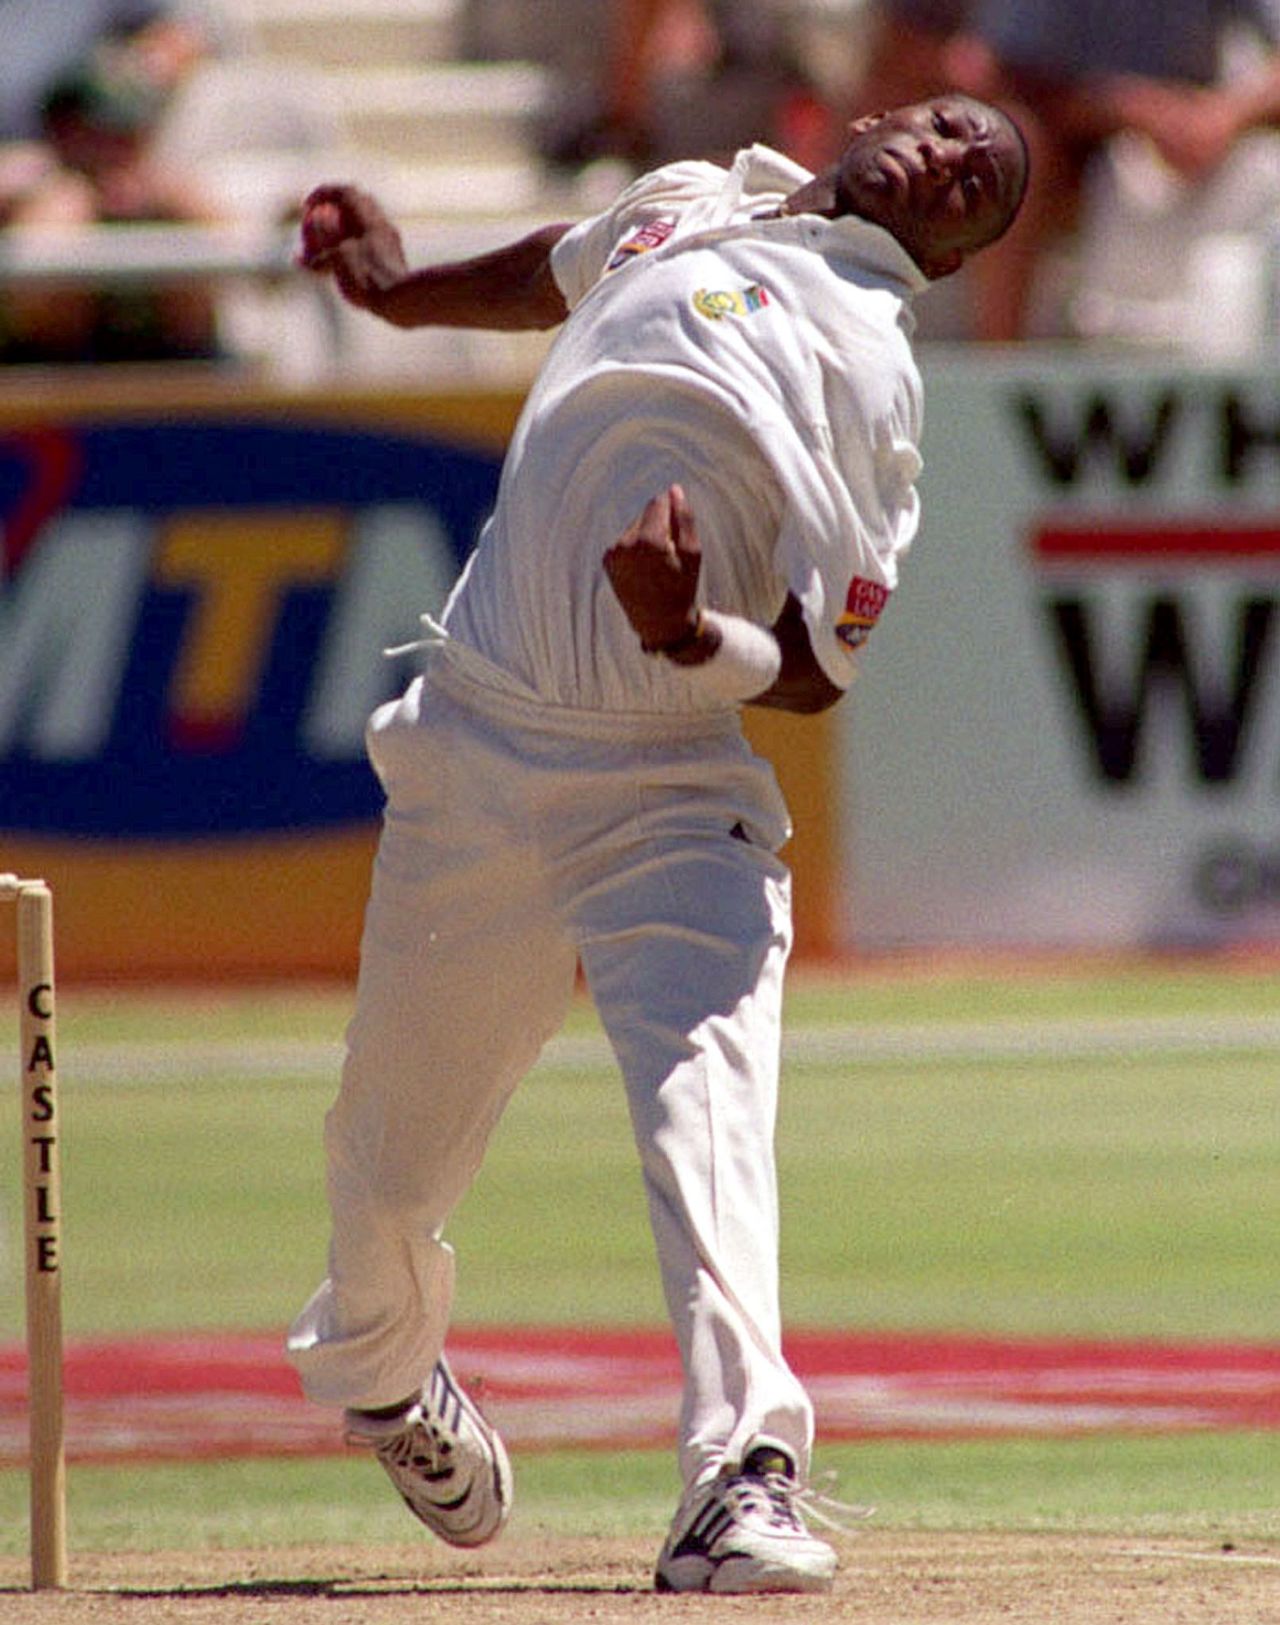 South Africa pacer Mfuneko Ngam prepares to deliver, South Africa v Sri Lanka, 2nd Test, Newlands, 1st day, January 2, 2001